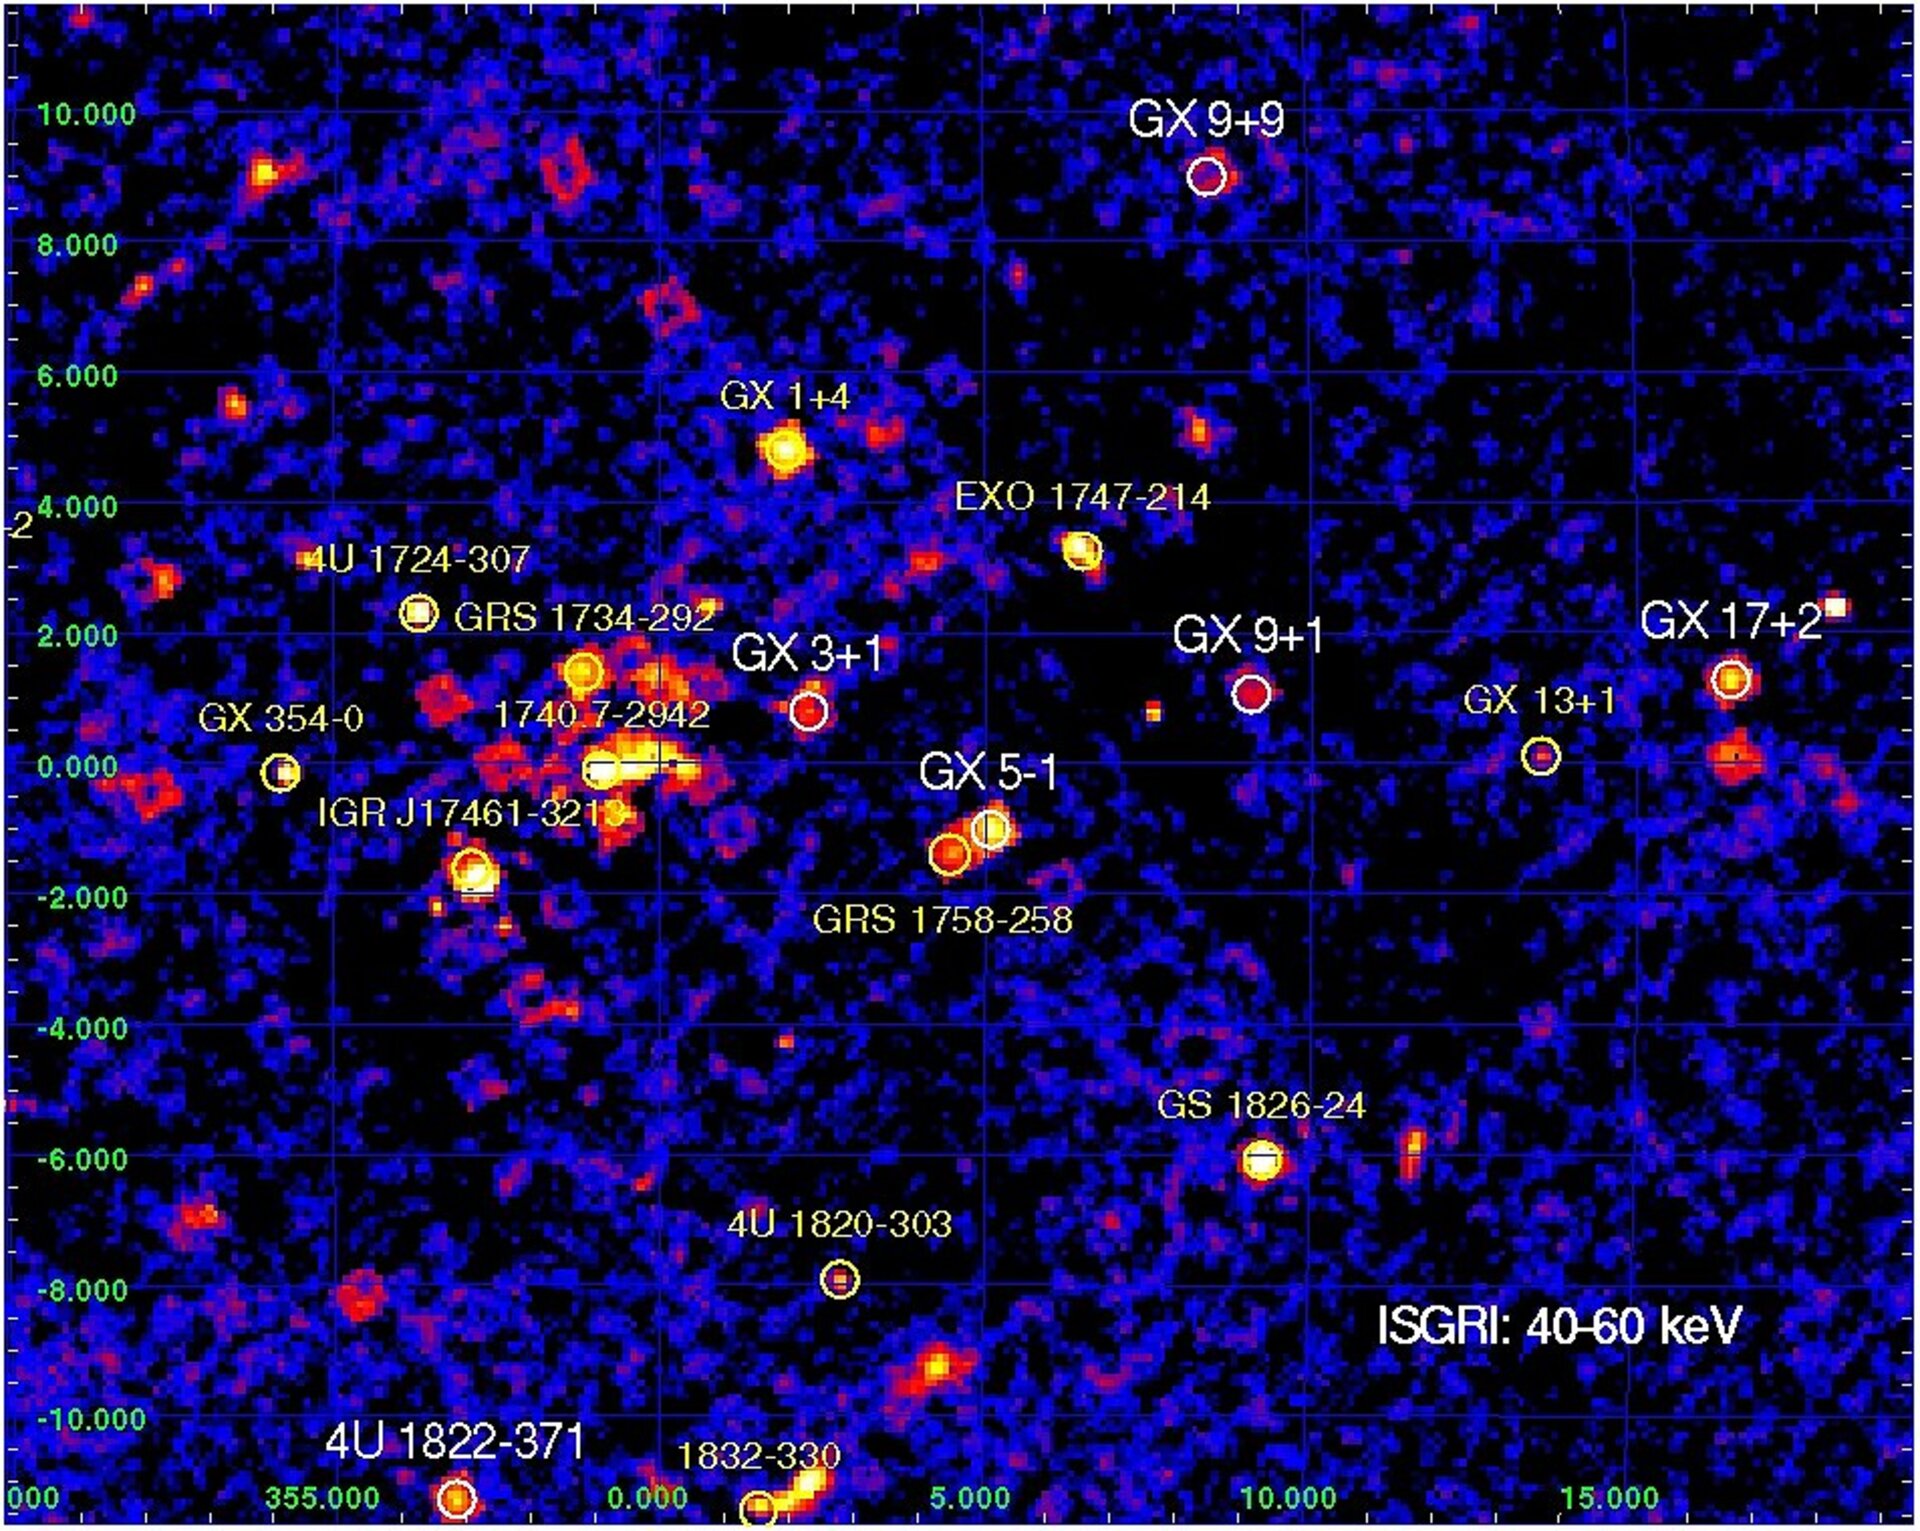 ISGRI images of the Galactic Centre in the 40-60 keV band